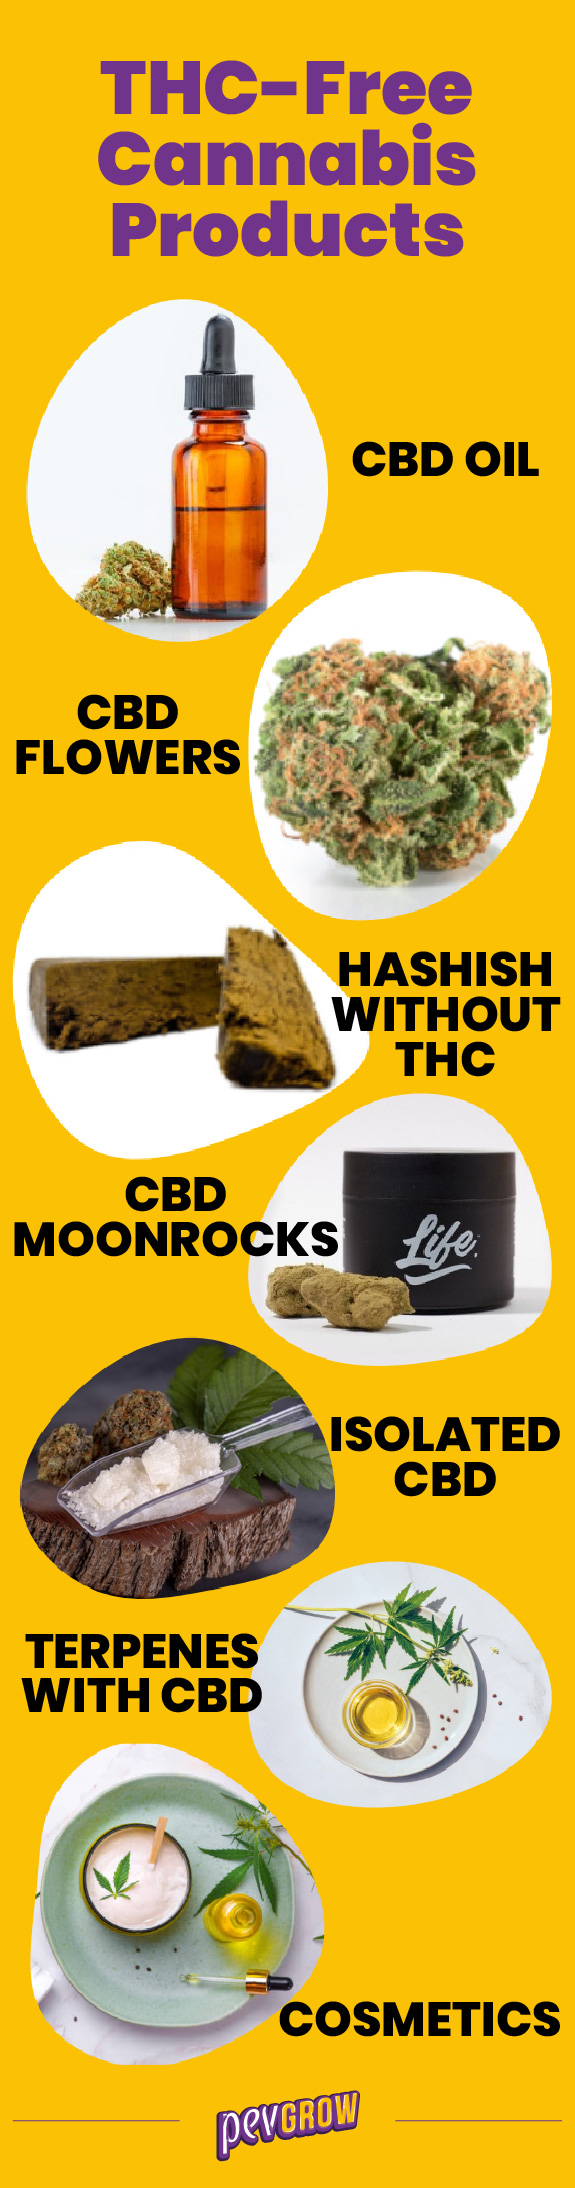 List of THC-free cannabis products